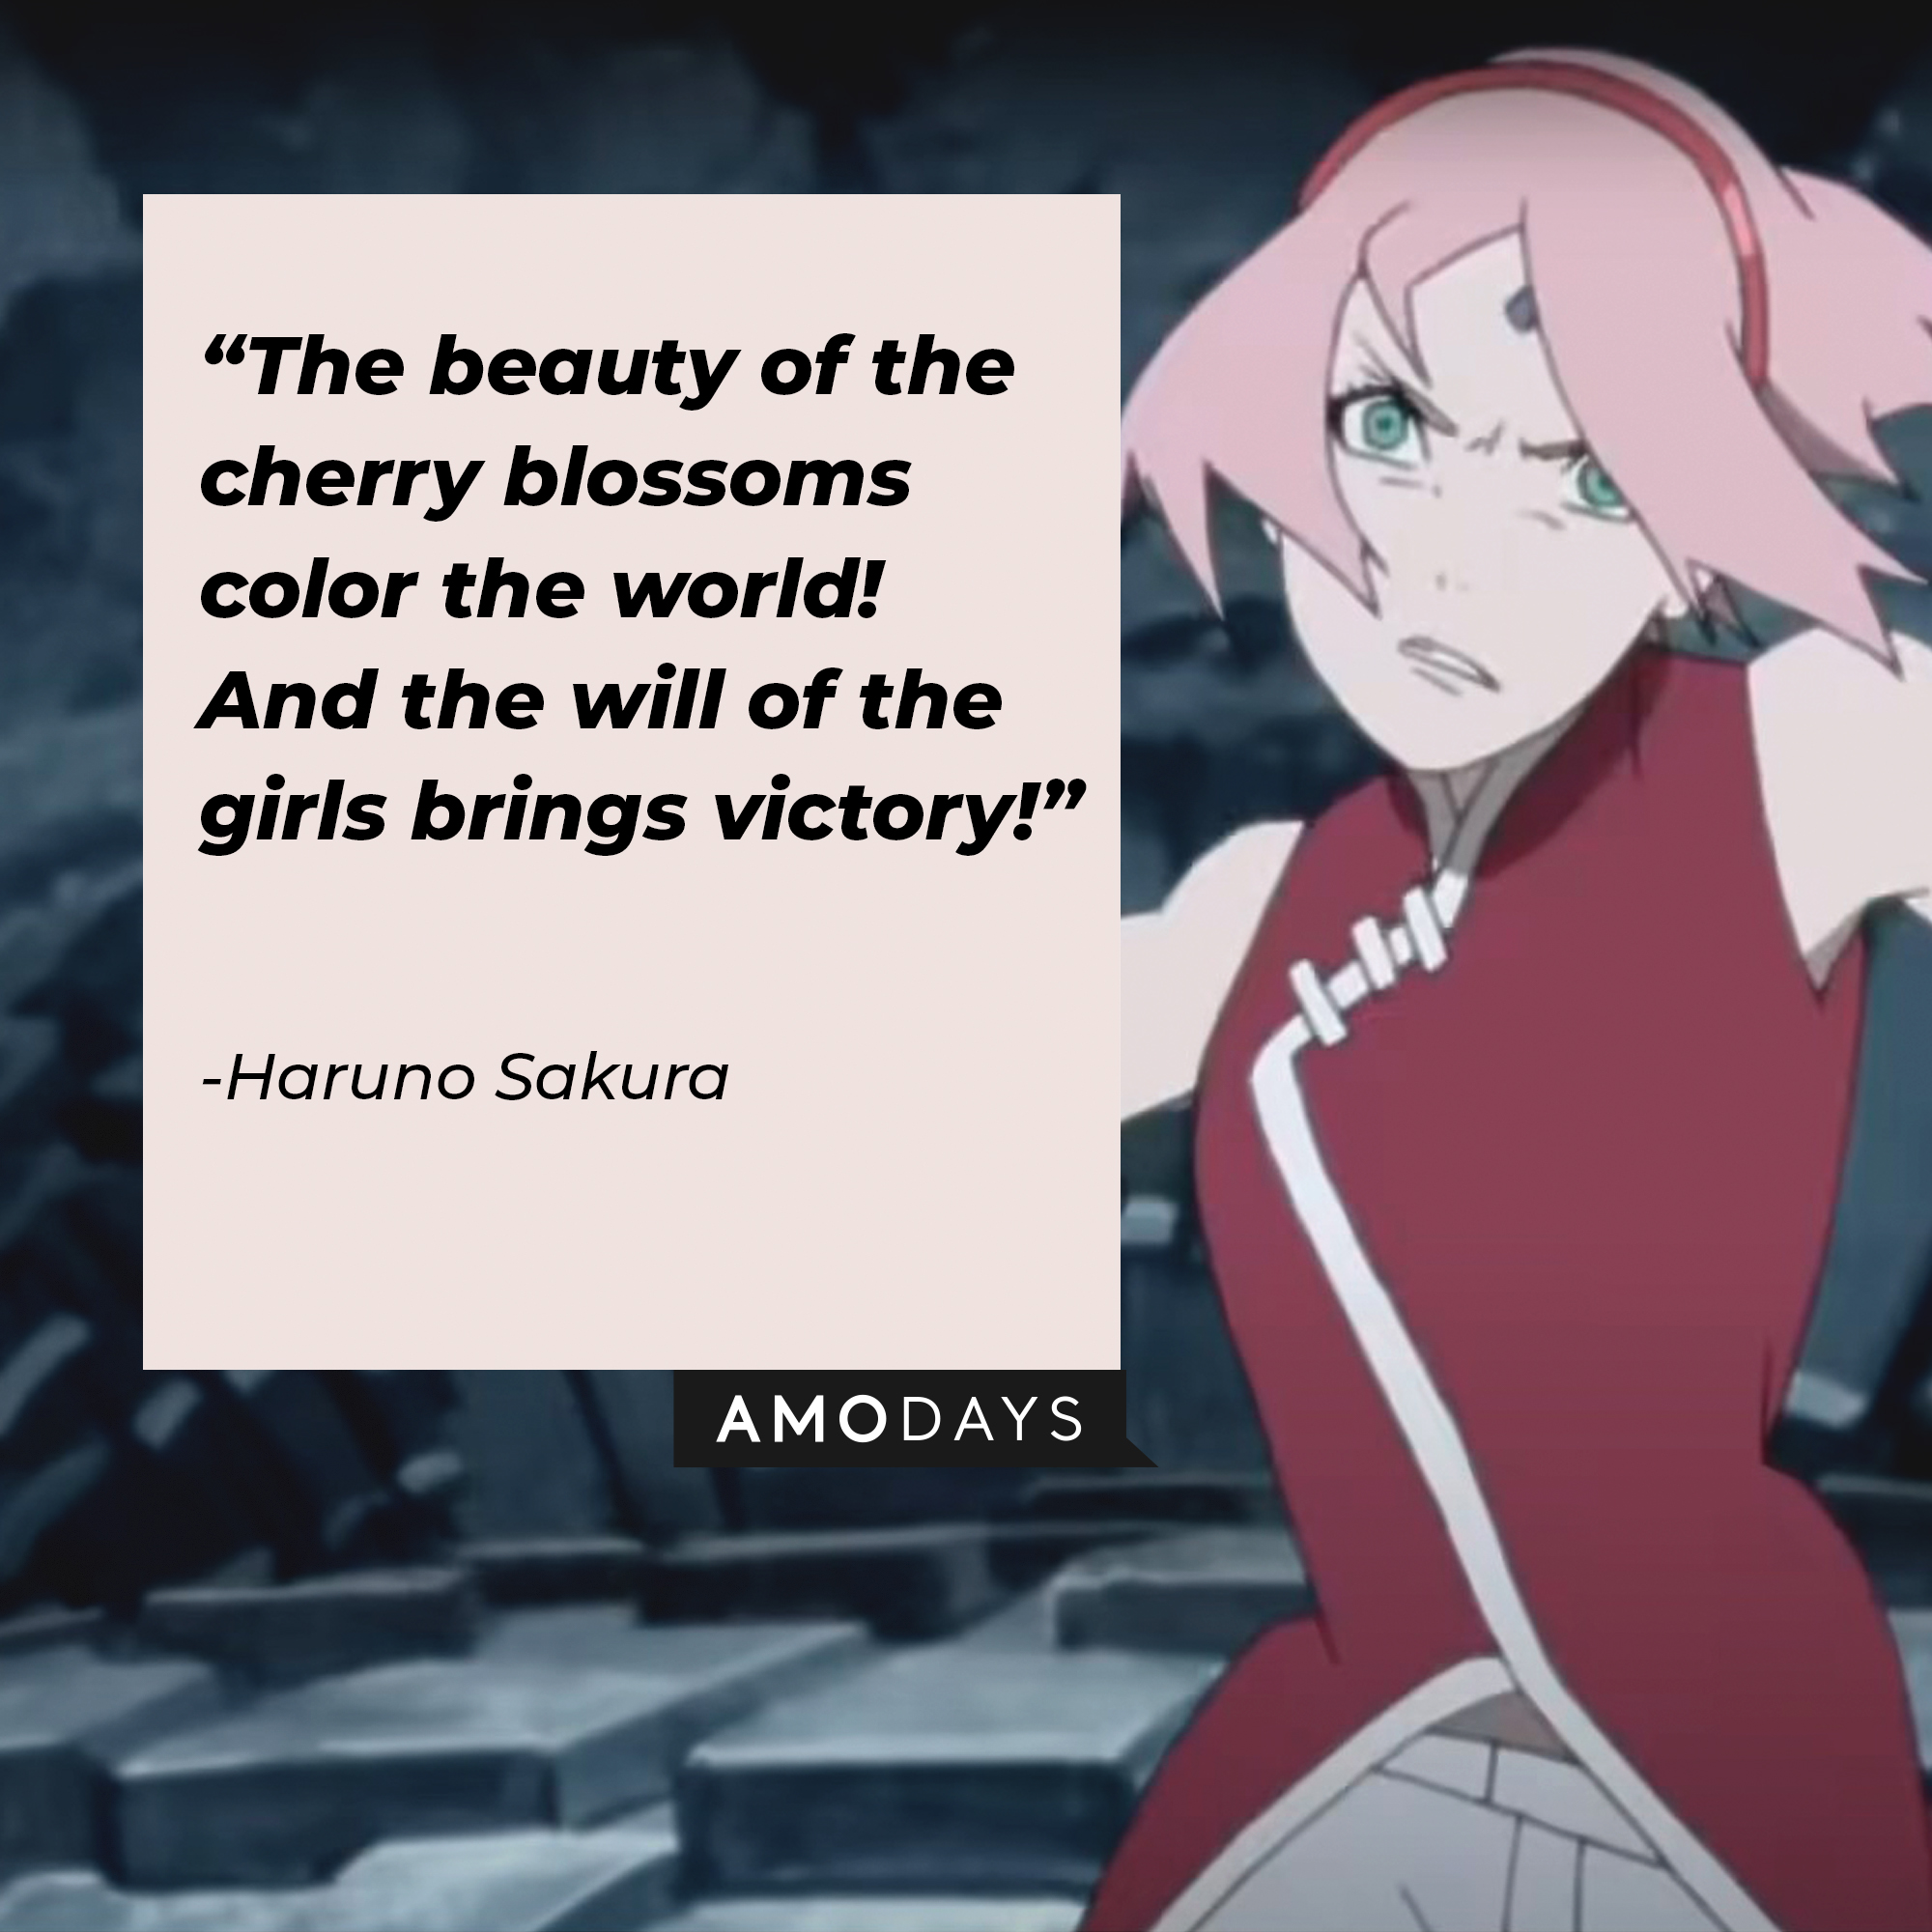 Haruno Sakura’s quote: “The beauty of the cherry blossoms color the world! And the will of the girls brings victory!” | Source: facebook.com/narutoofficialsns